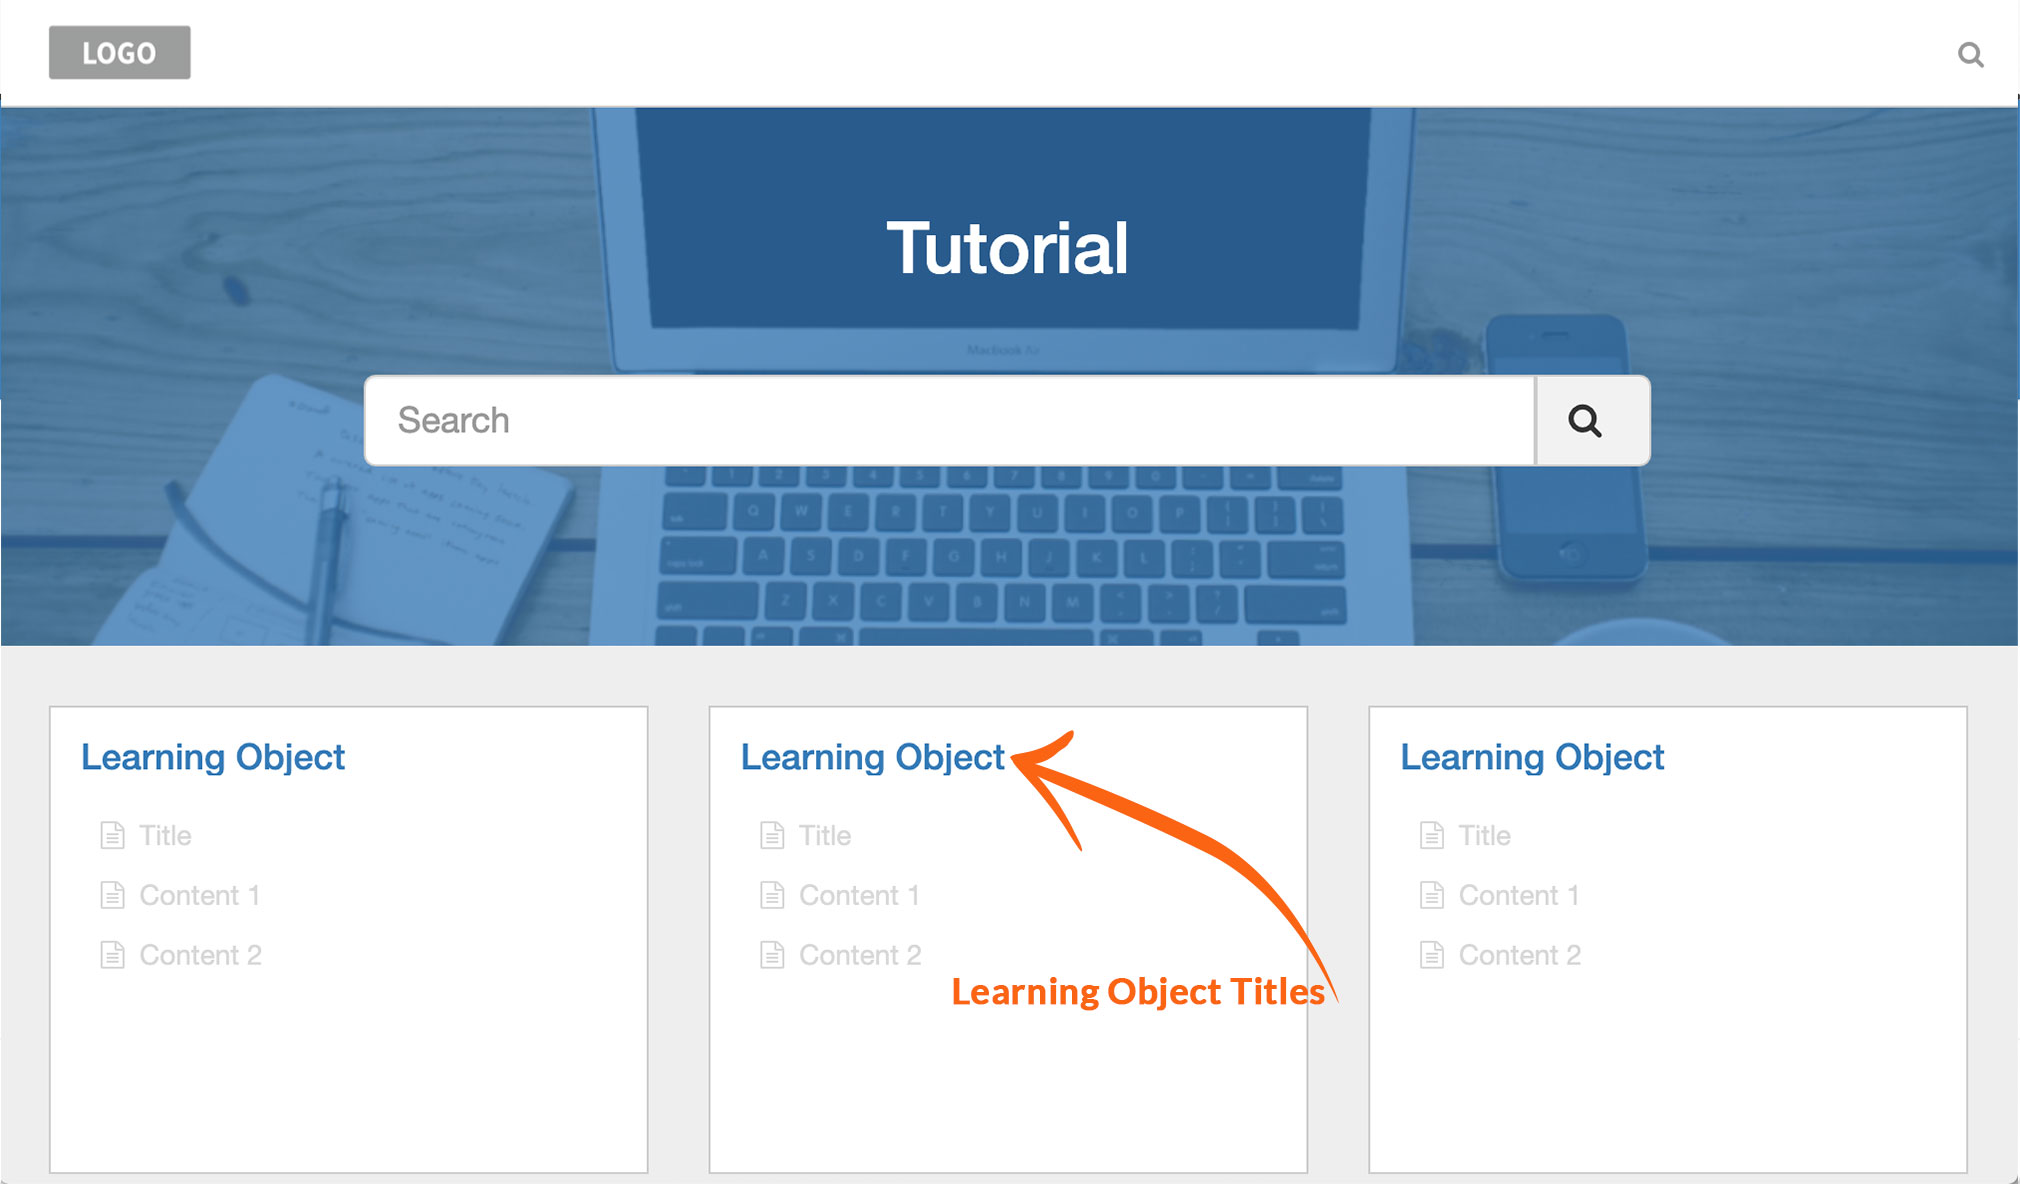 Knowledge Base - Learning Object Titles